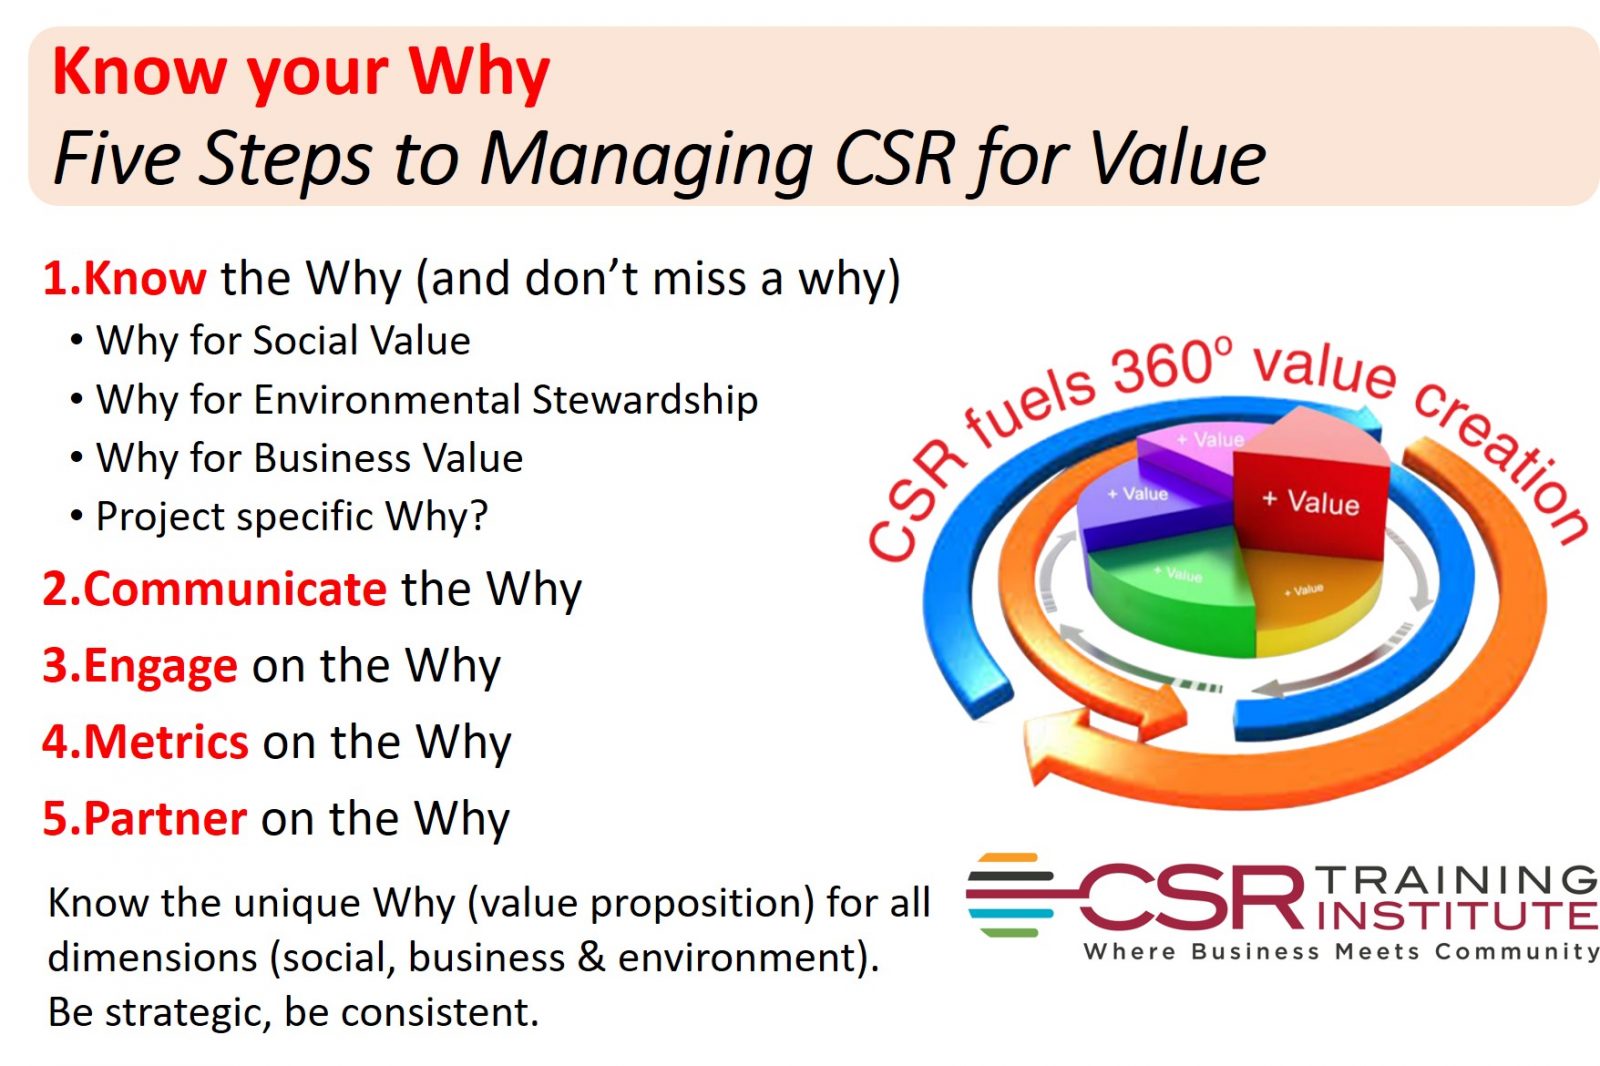 Five steps to managing CSR for value